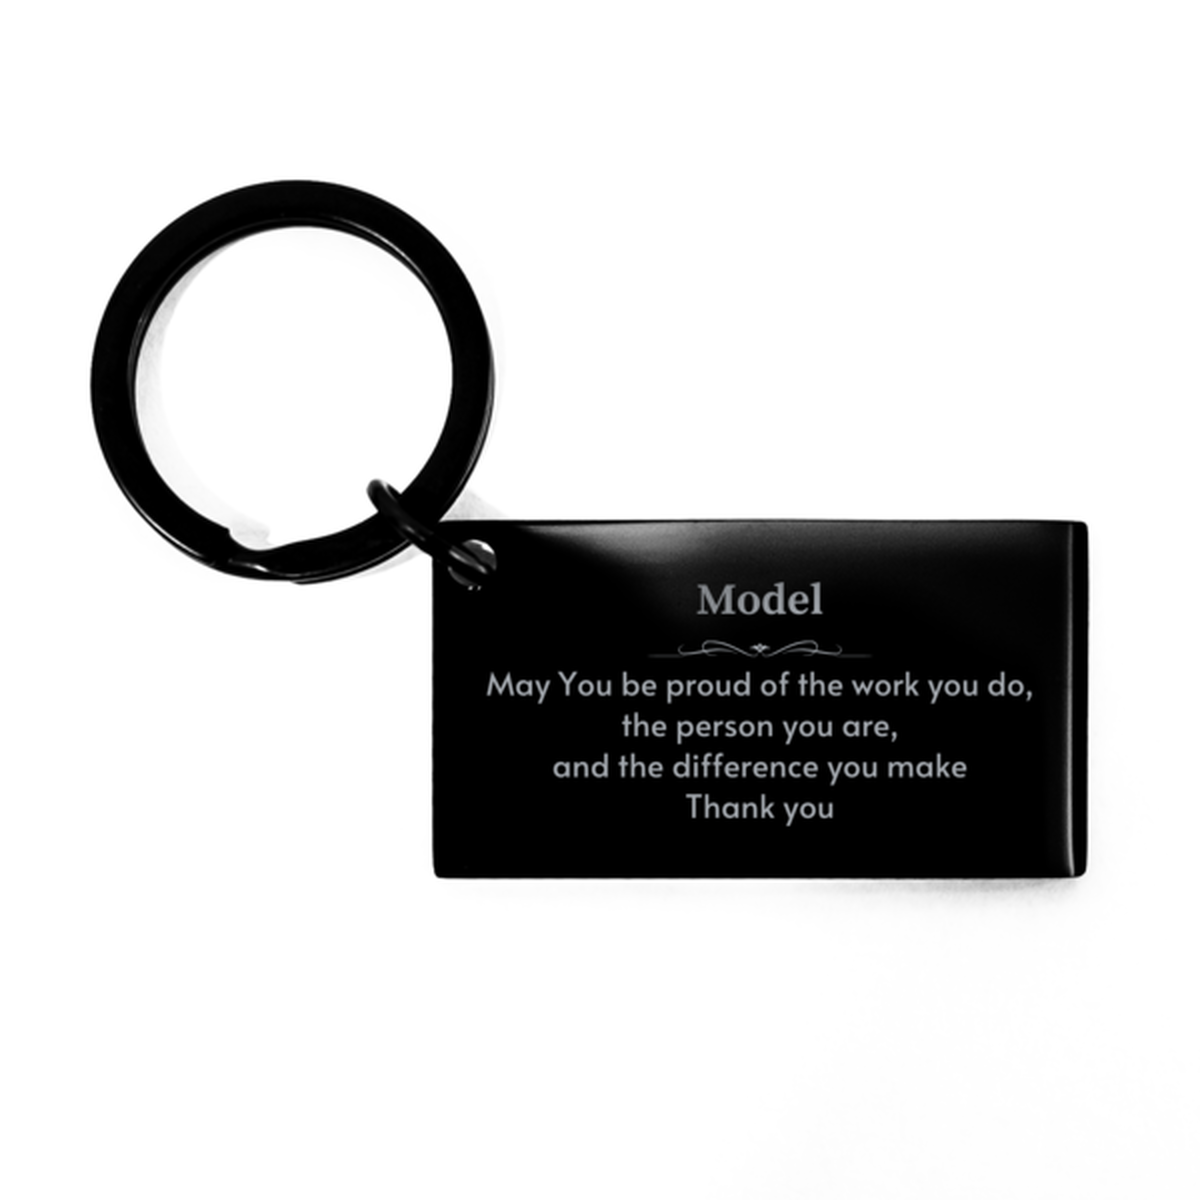 Heartwarming Keychain Retirement Coworkers Gifts for Model, Paralegal May You be proud of the work you do, the person you are Gifts for Boss Men Women Friends